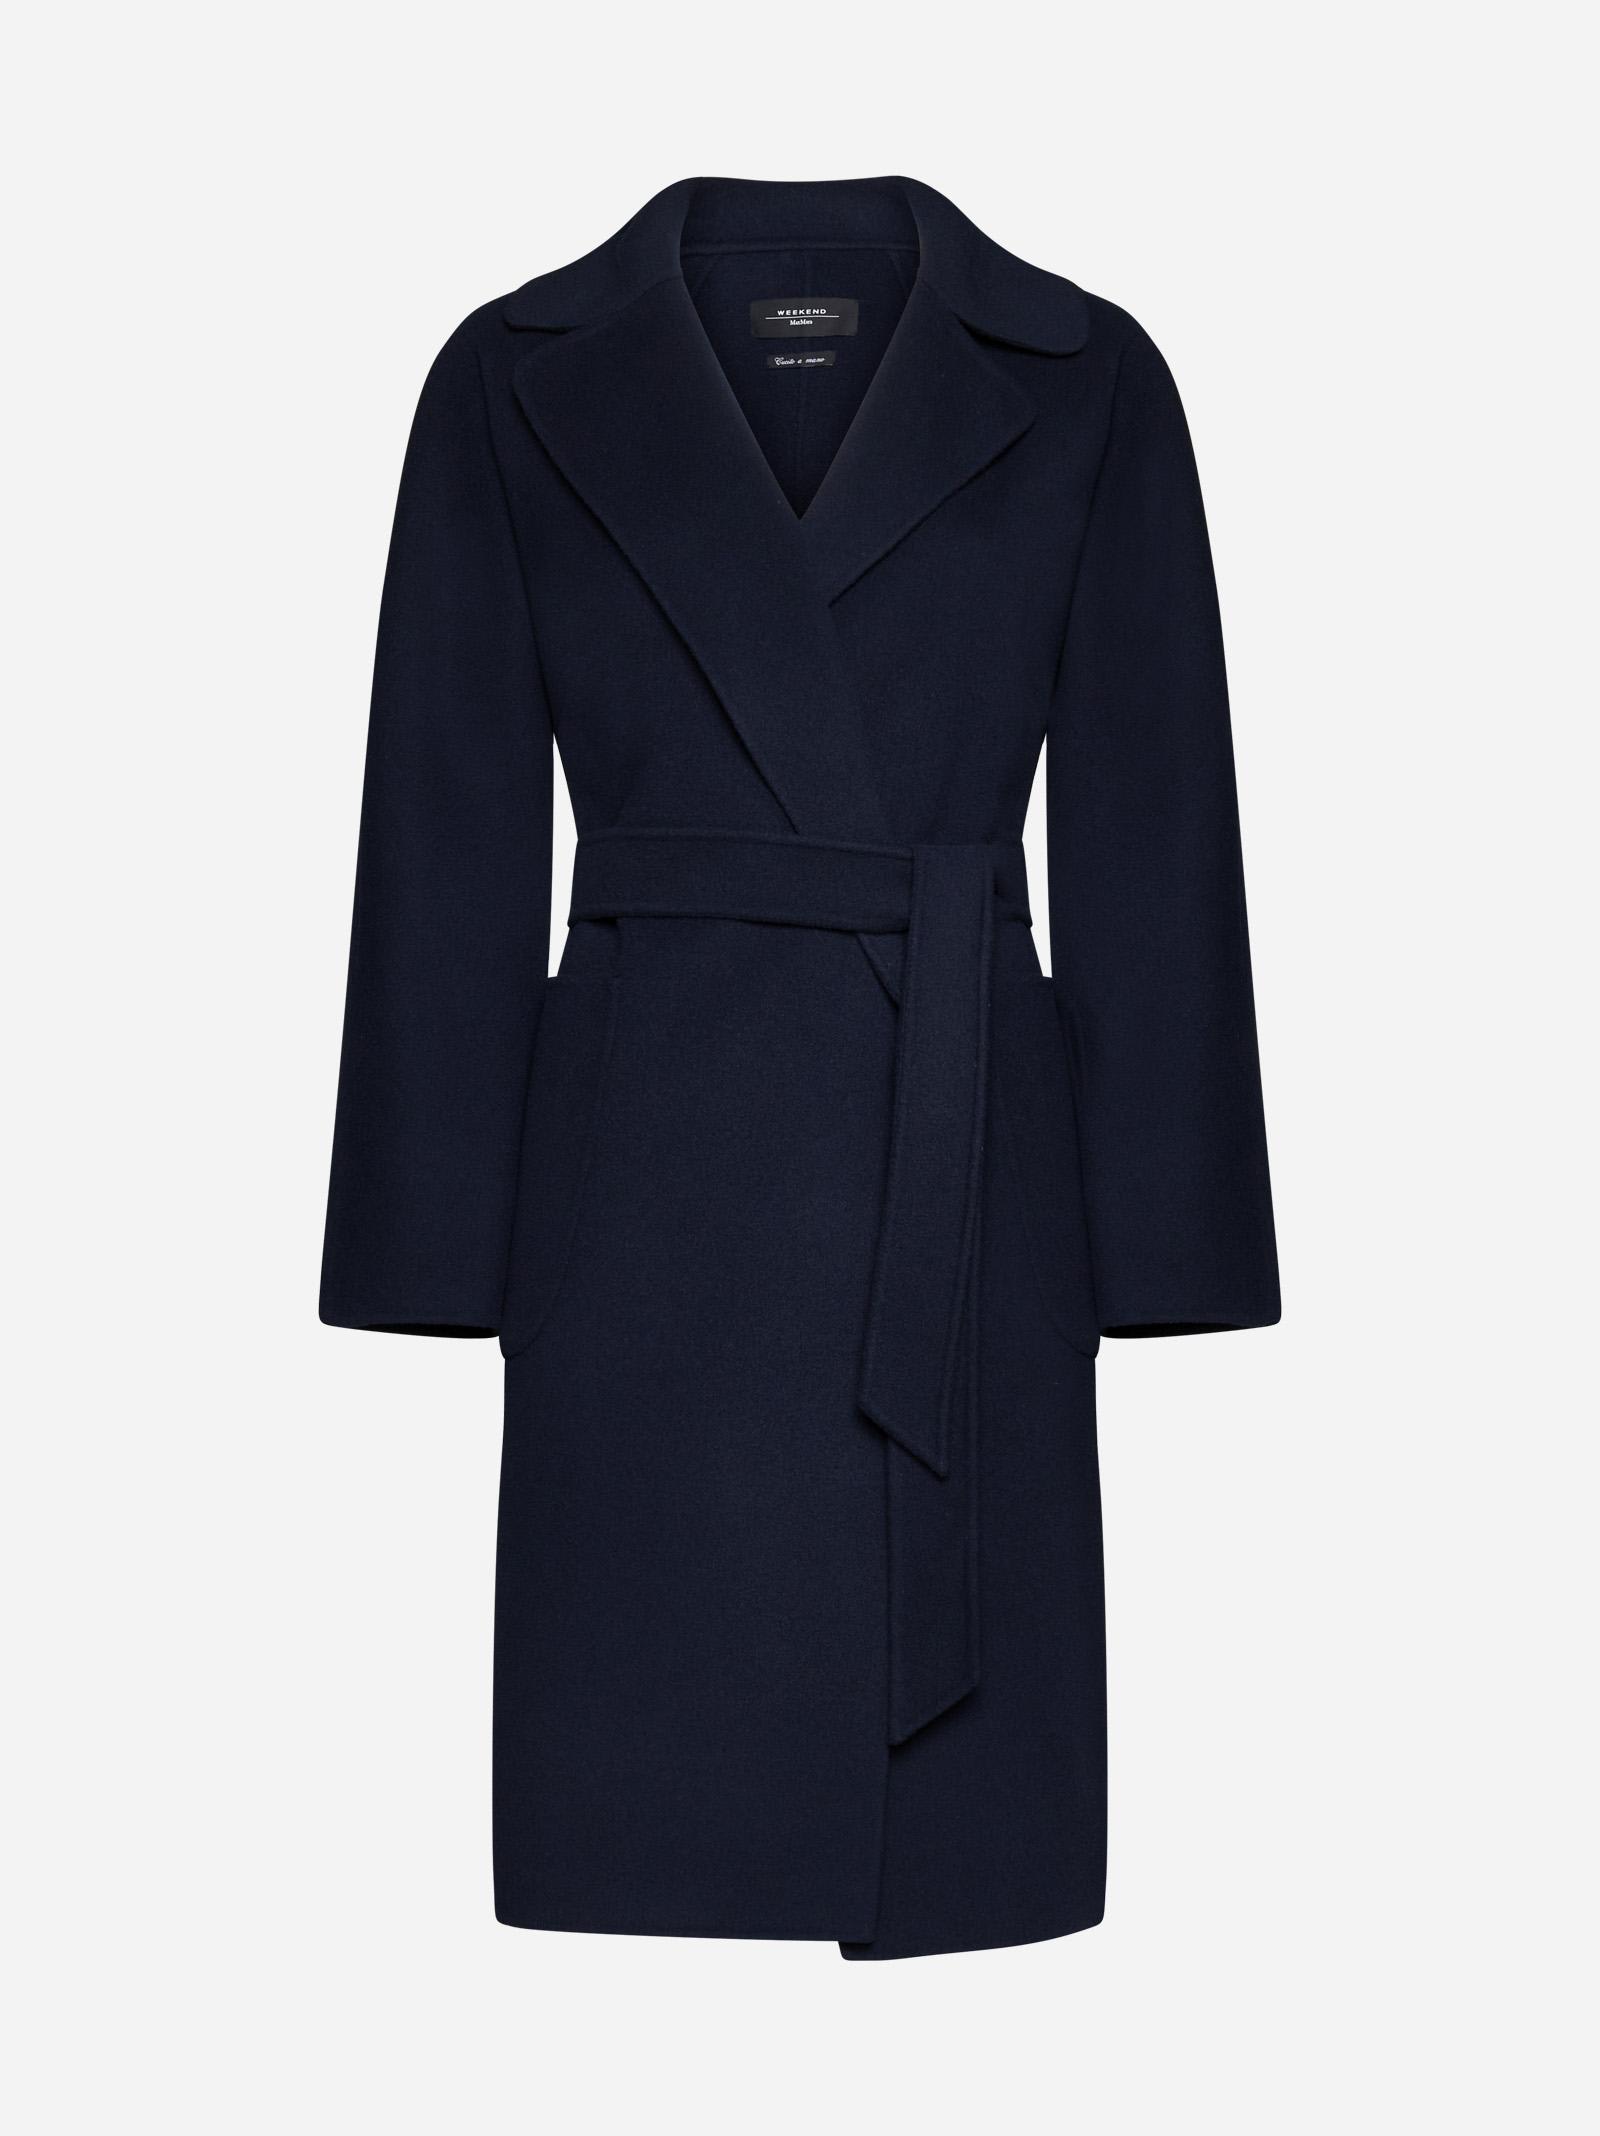 Rovo Belted Wool Coat